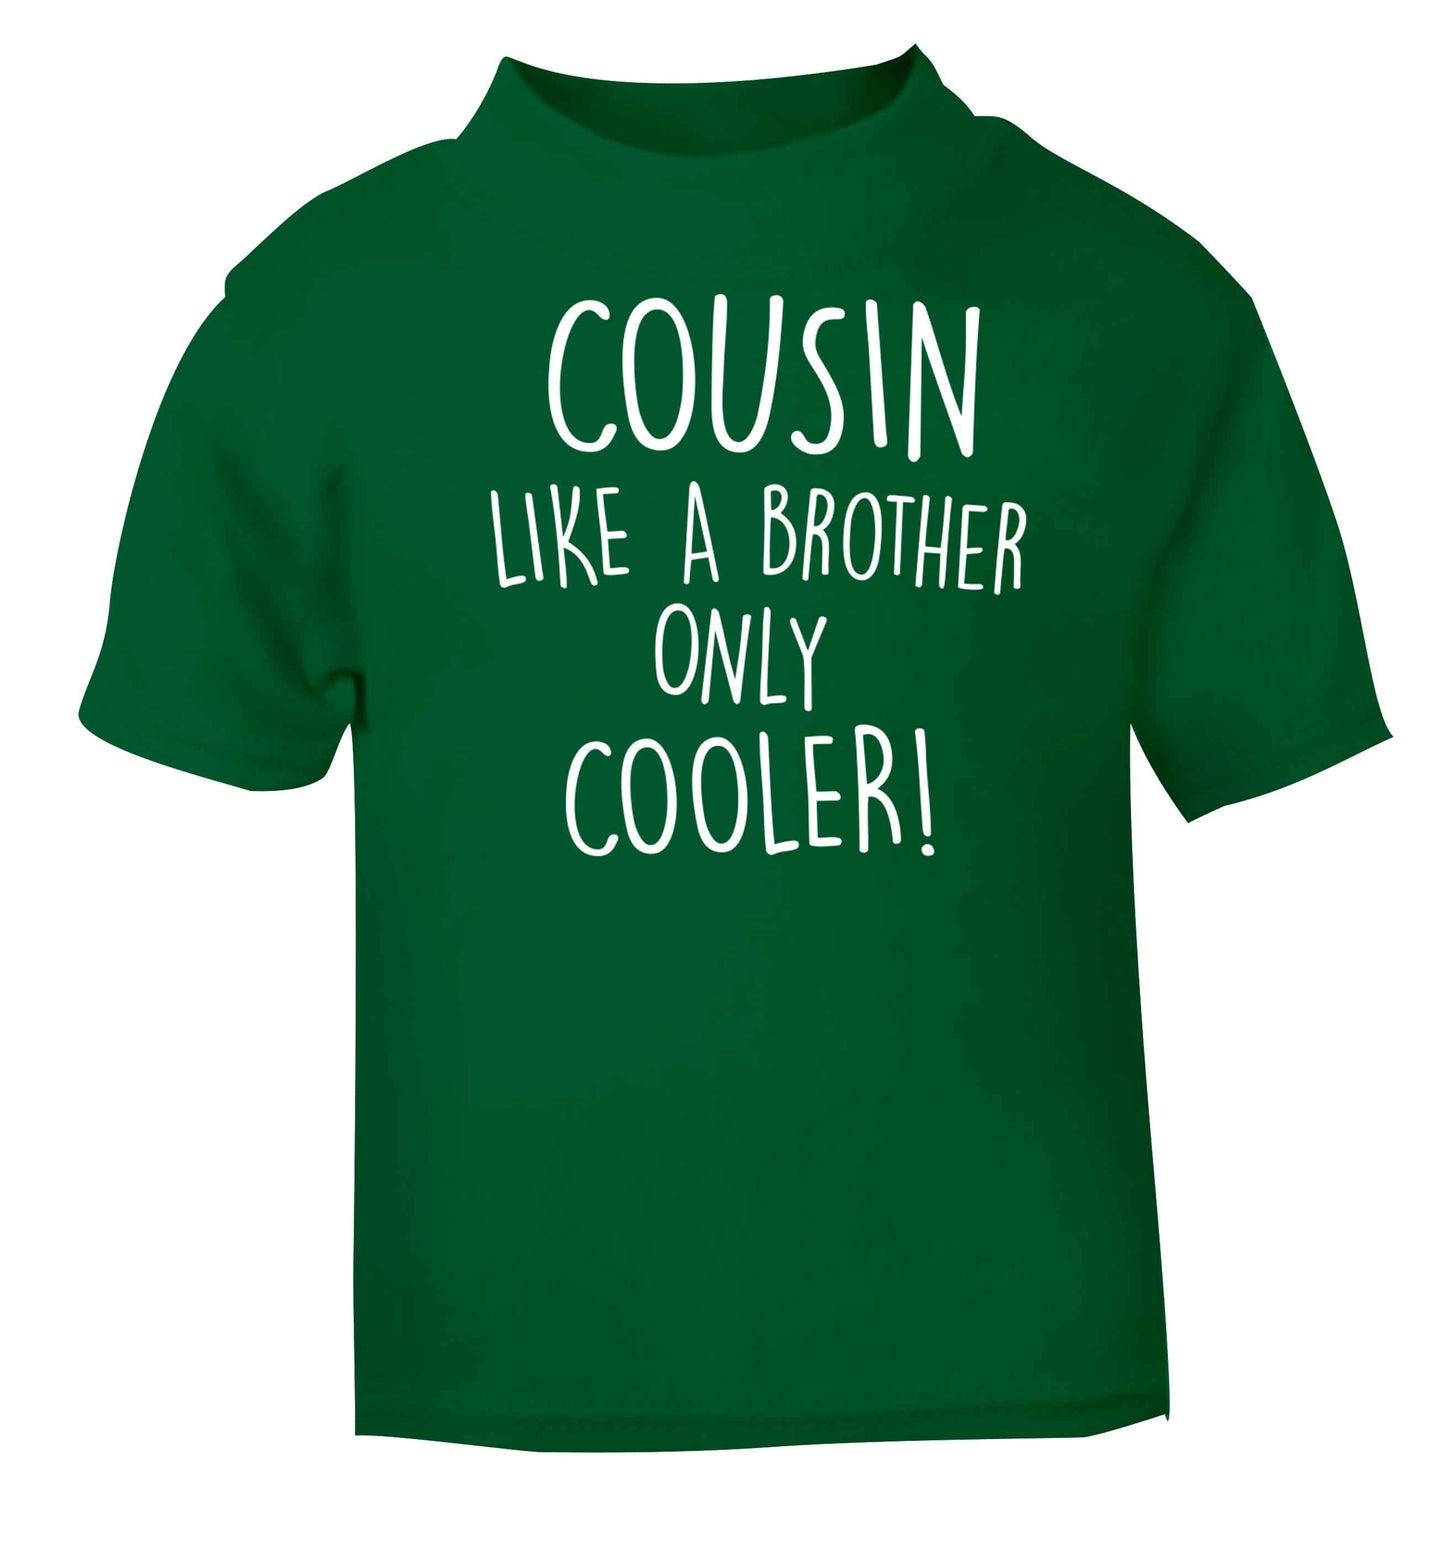 Cousin like a brother only cooler green baby toddler Tshirt 2 Years